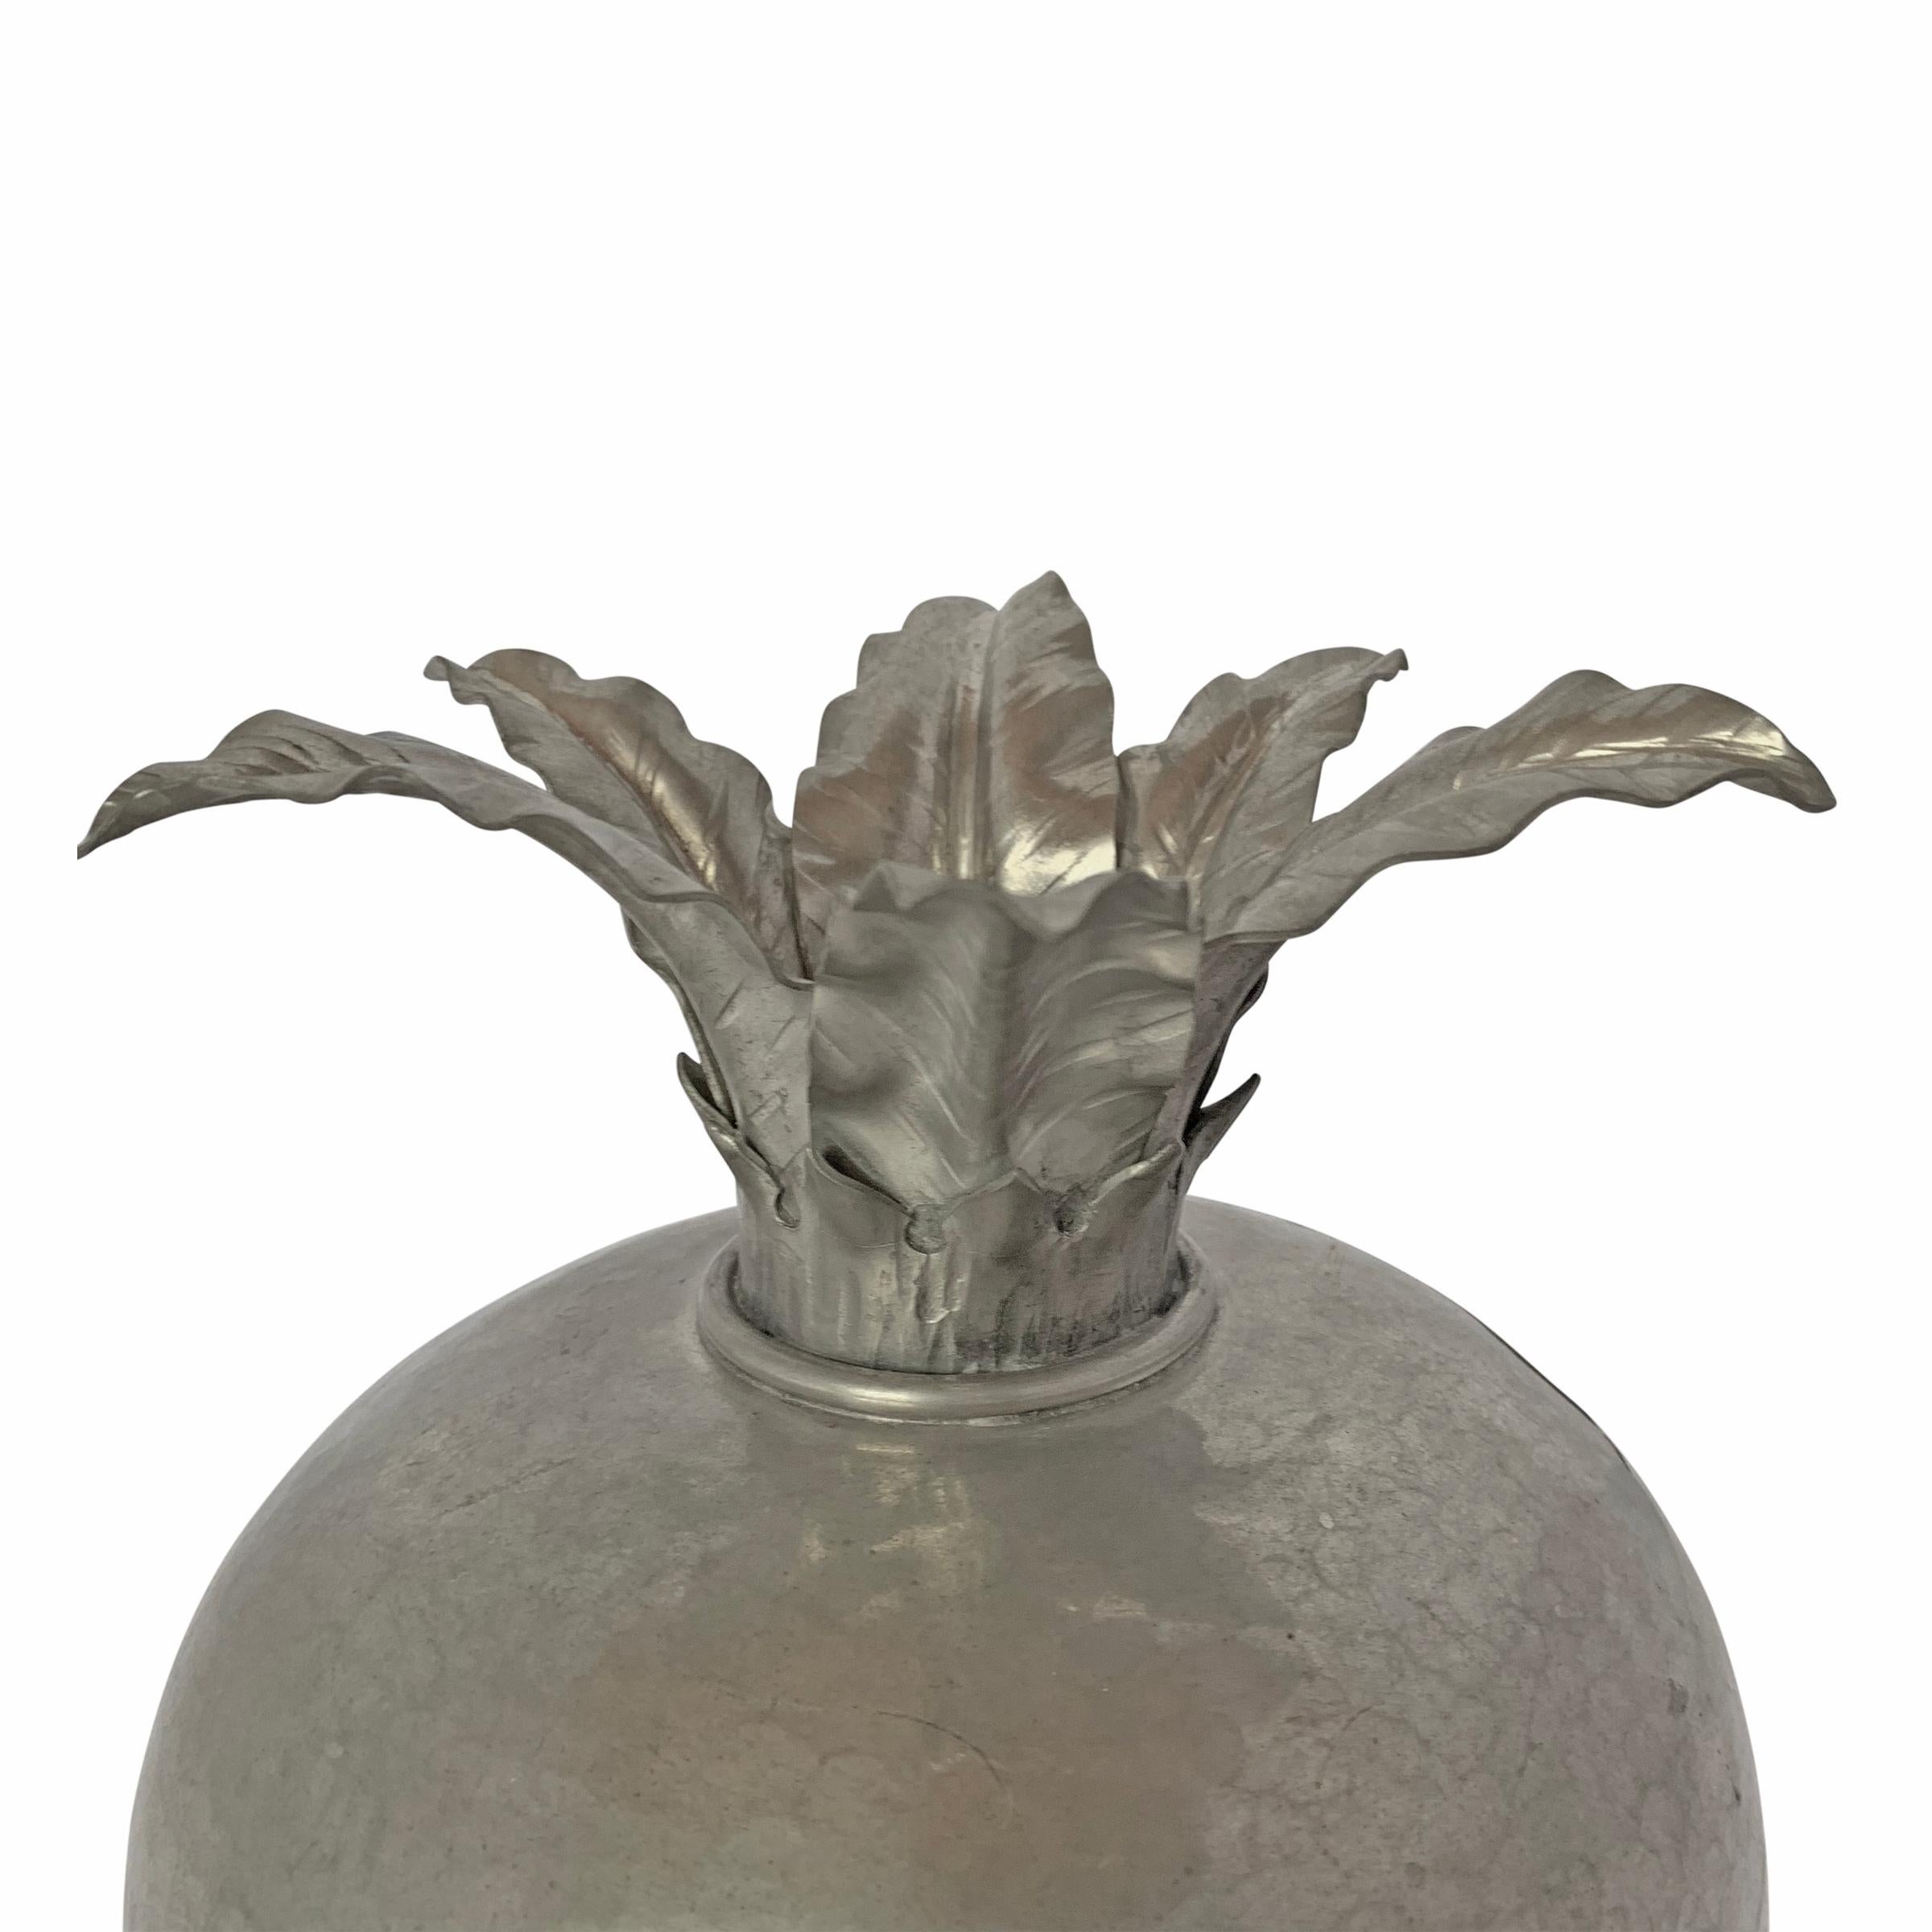 An early 20th century Italian hand-hammered pewter pomegranate-form vase with six large leaves and wonderful texture. Marked, 